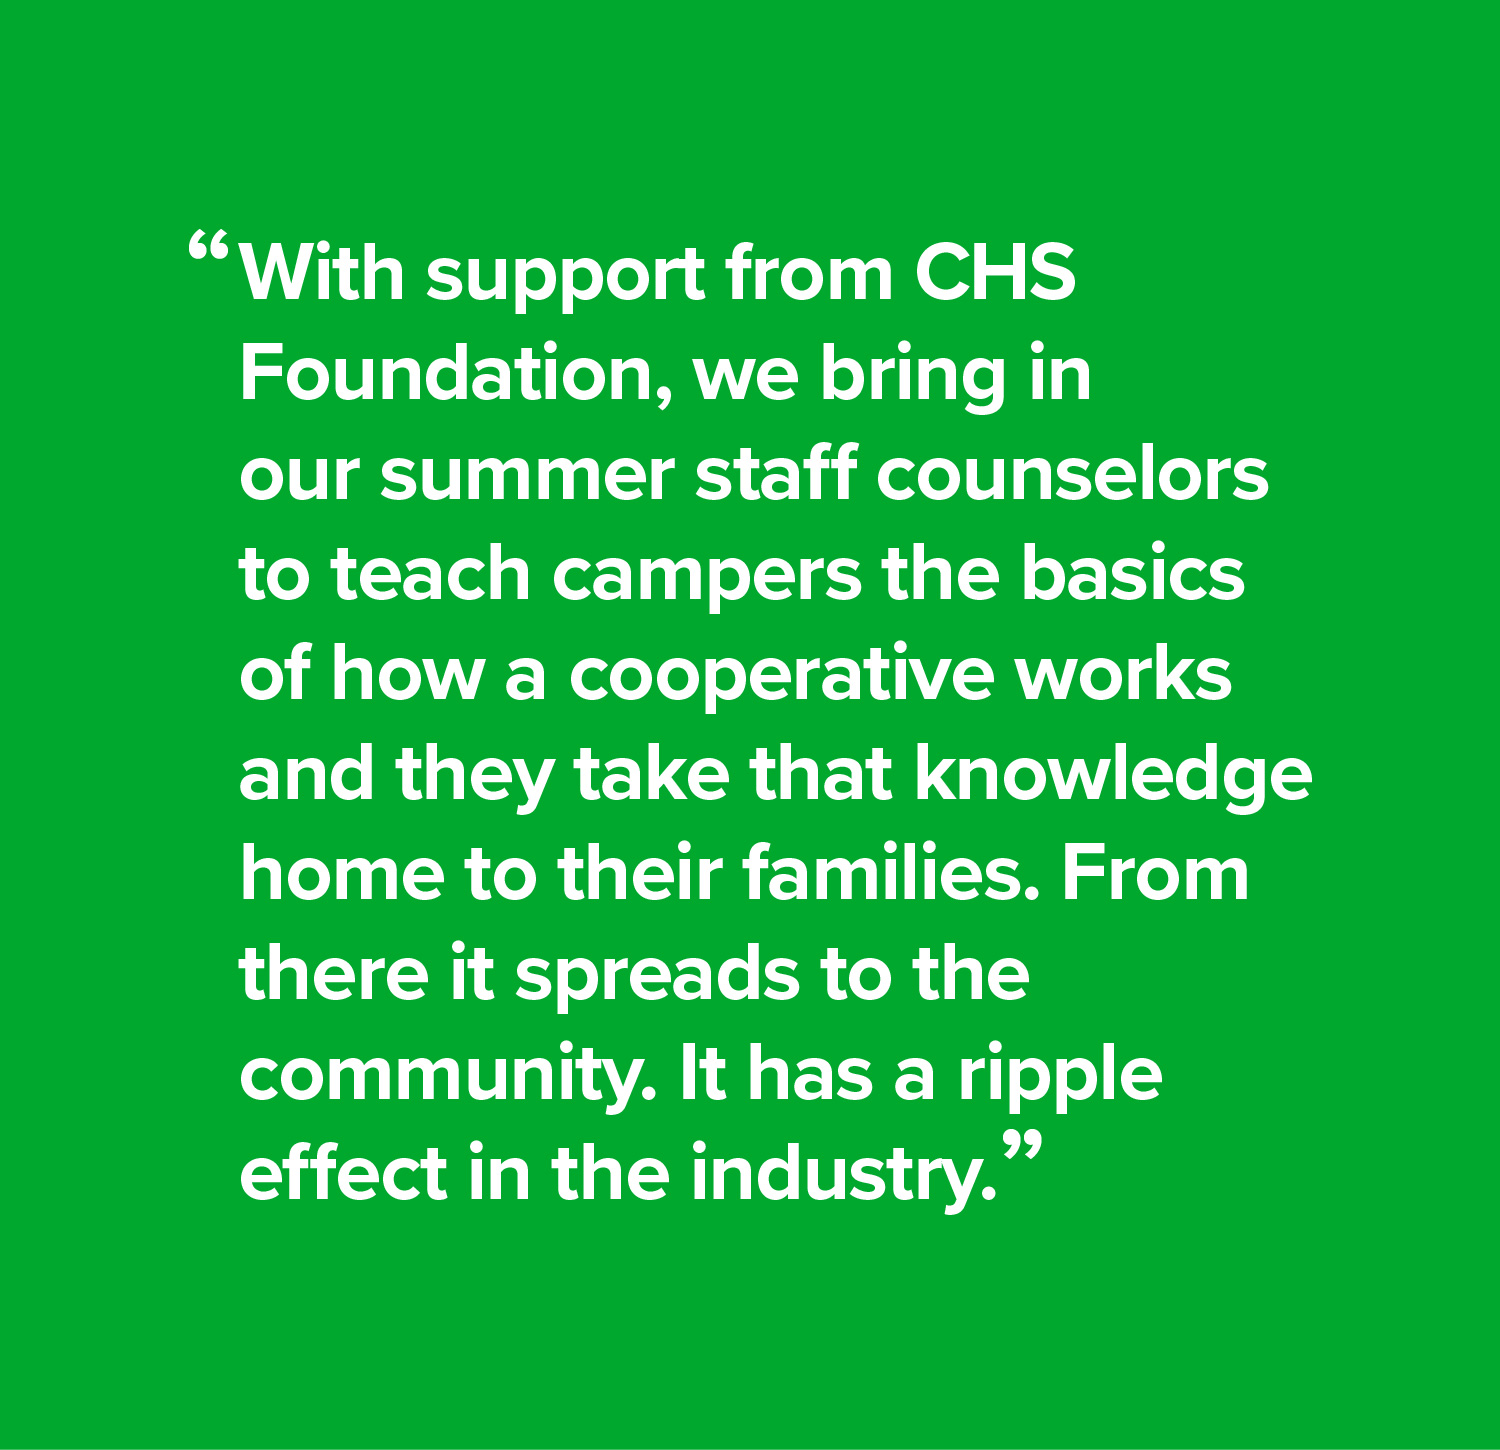 With support from CHS Foundation, we bring in our summer staff counselors to teach campers the basics of how a cooperative works and they take that knowledge home to their families. From there it spreads to the community. It has a ripple effect in the industry